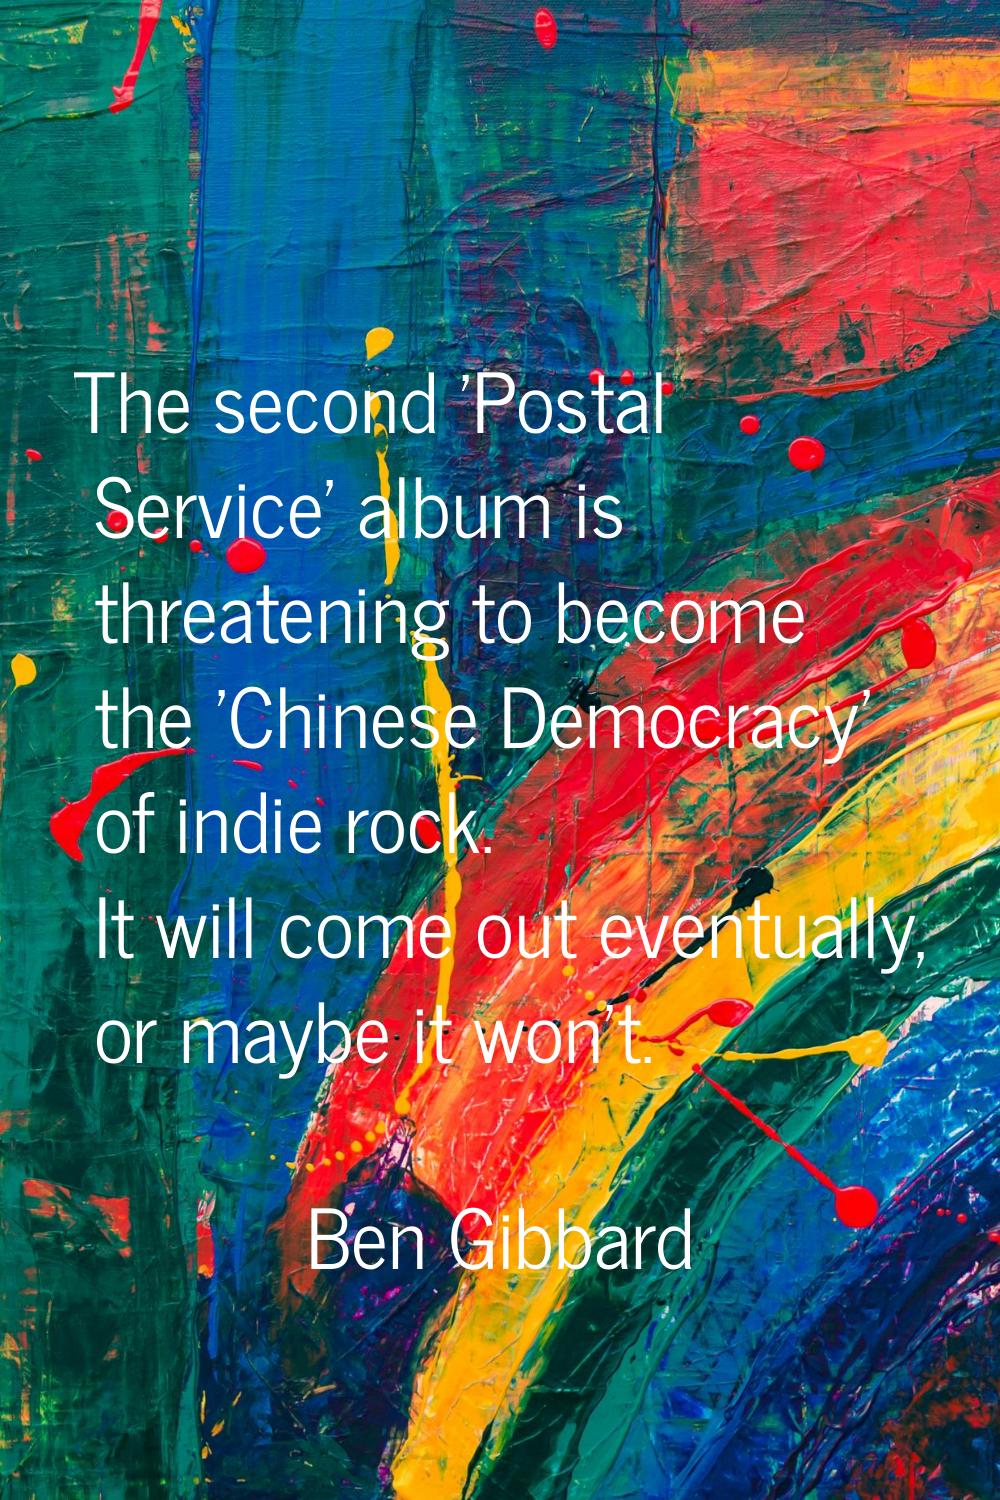 The second 'Postal Service' album is threatening to become the 'Chinese Democracy' of indie rock. I